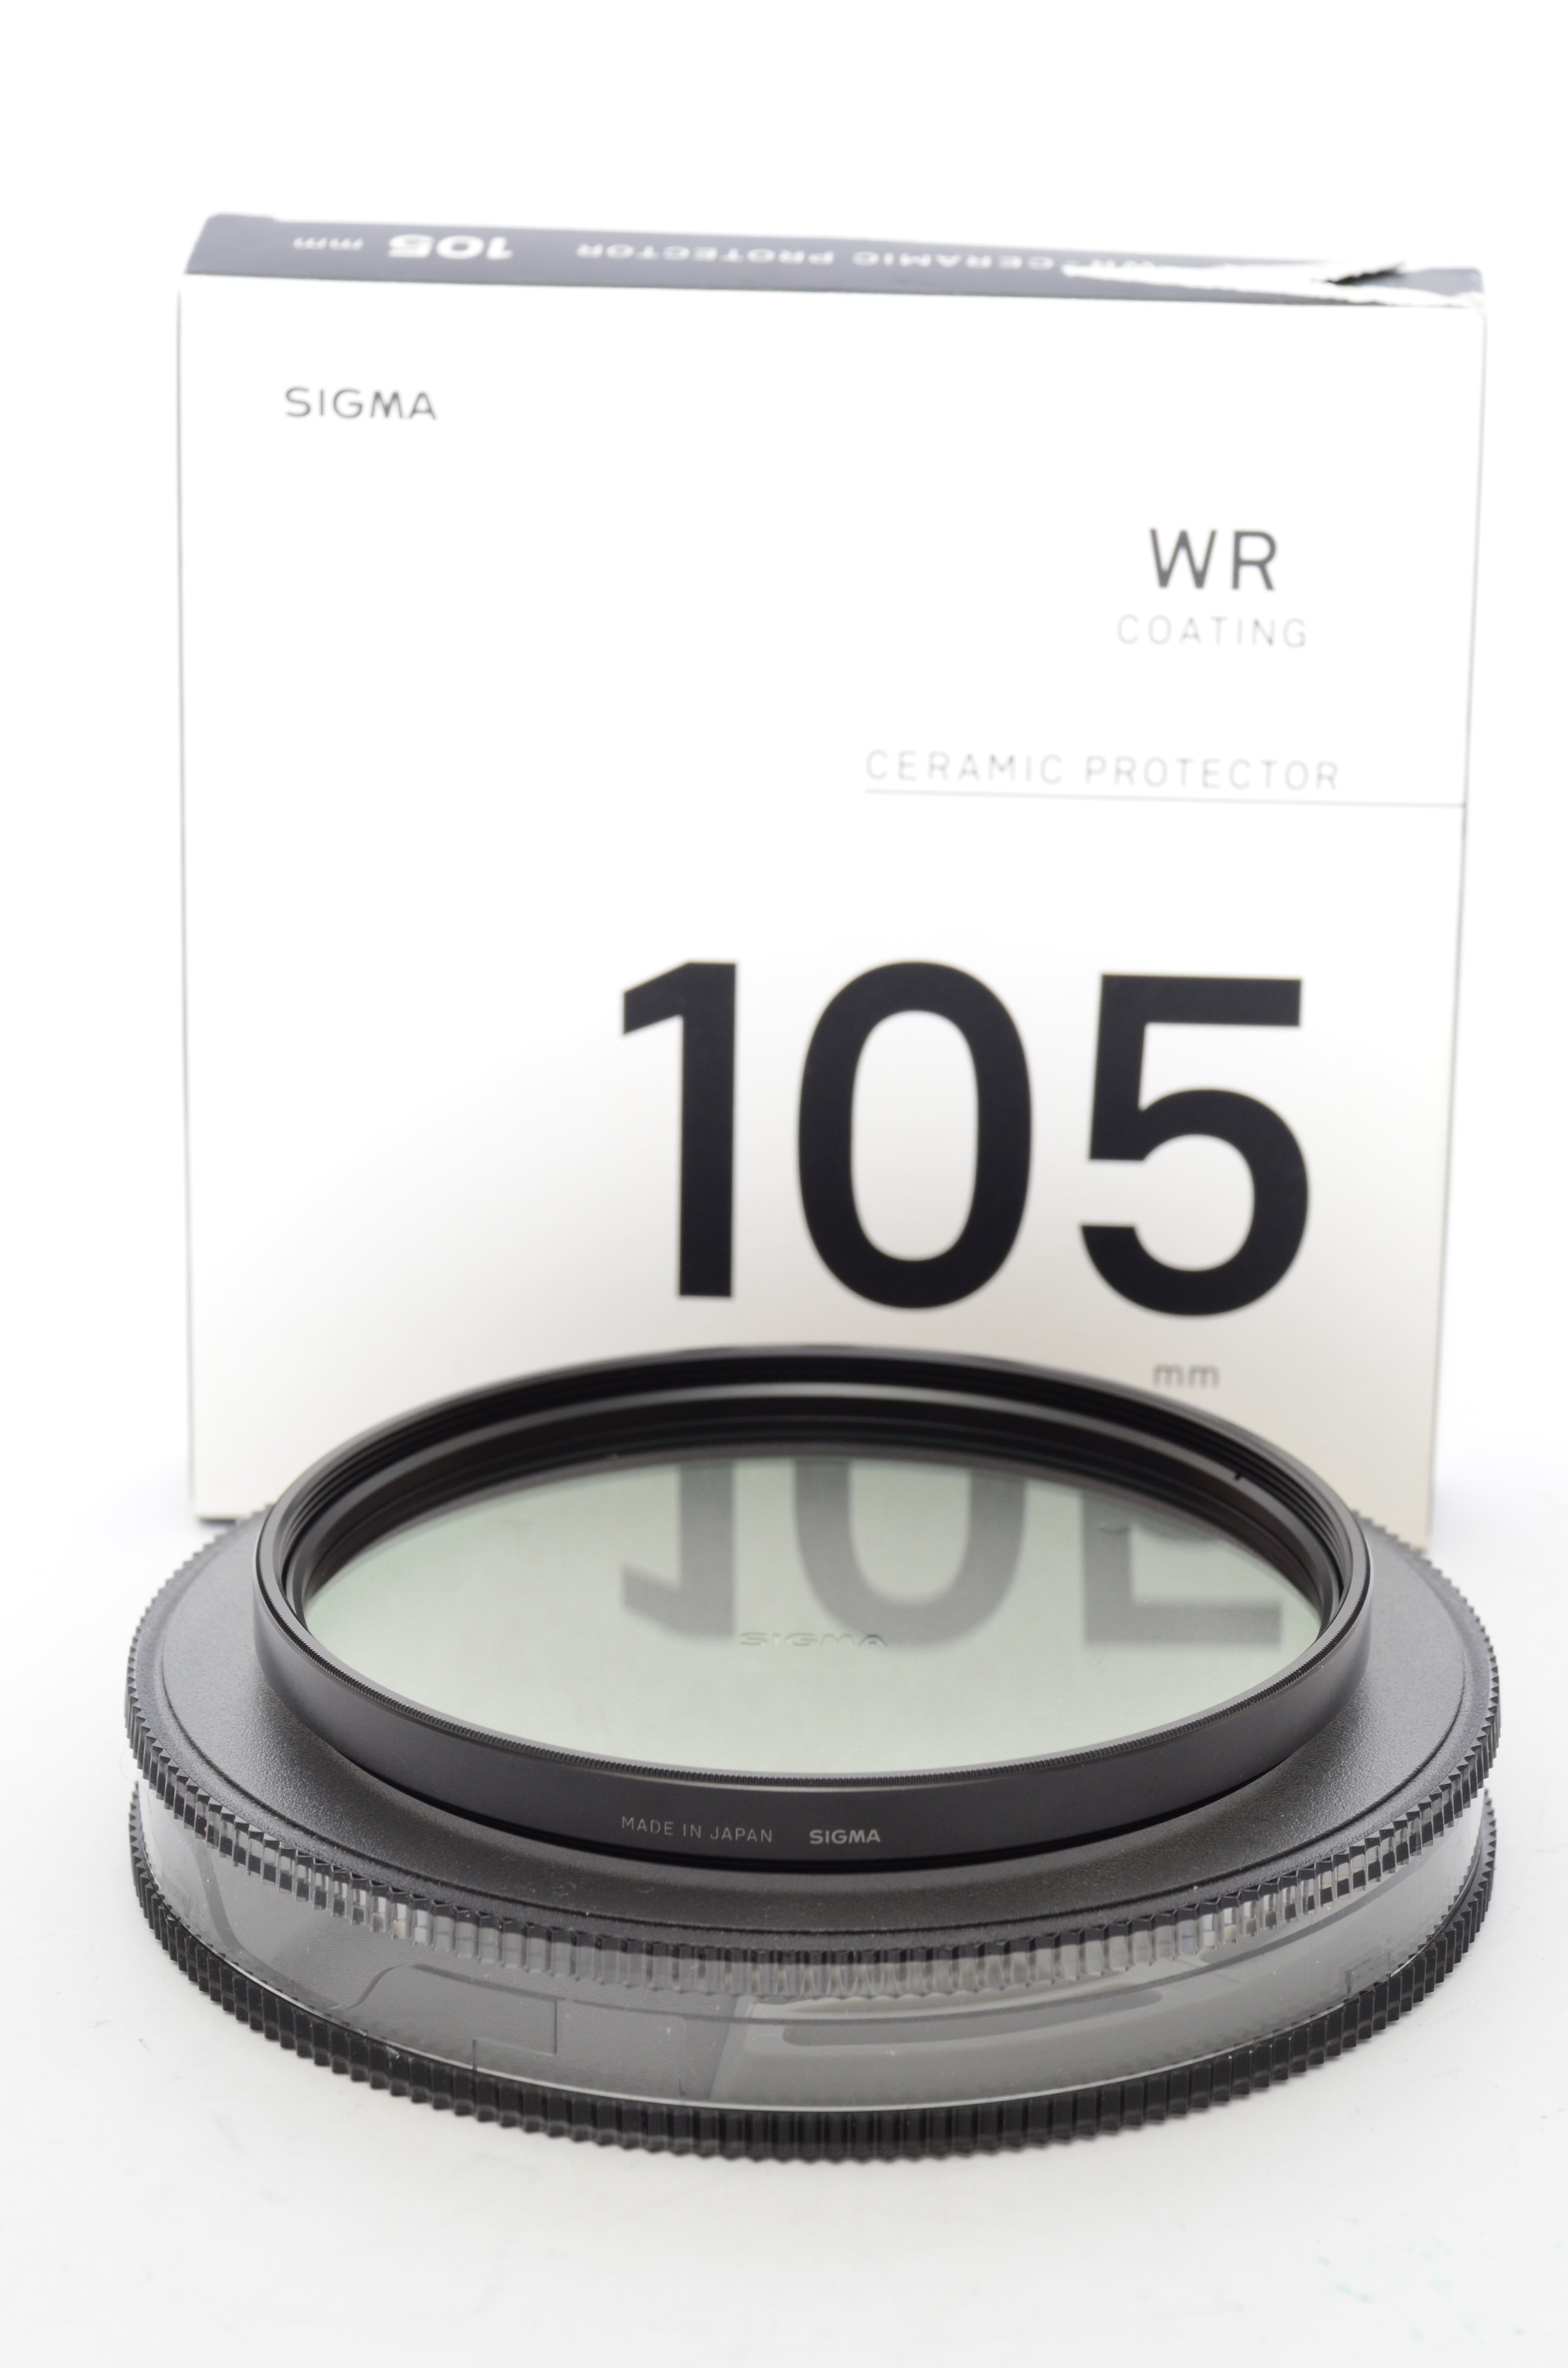 Used Sigma WR - Ceramic Protector 105mm Filter